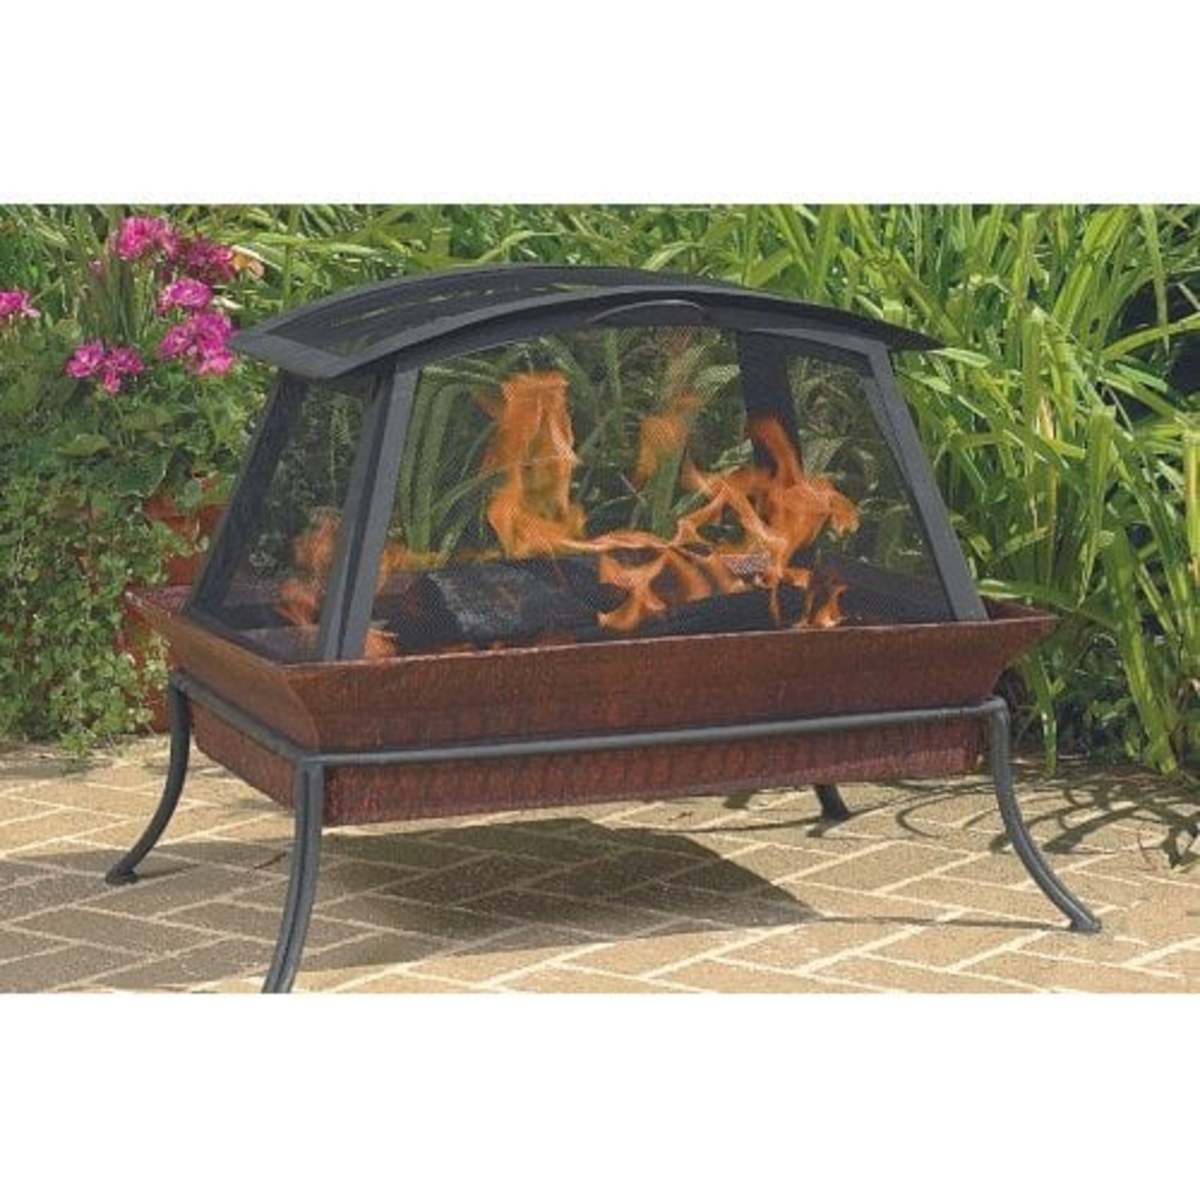 An Overview of Outdoor Fireplaces